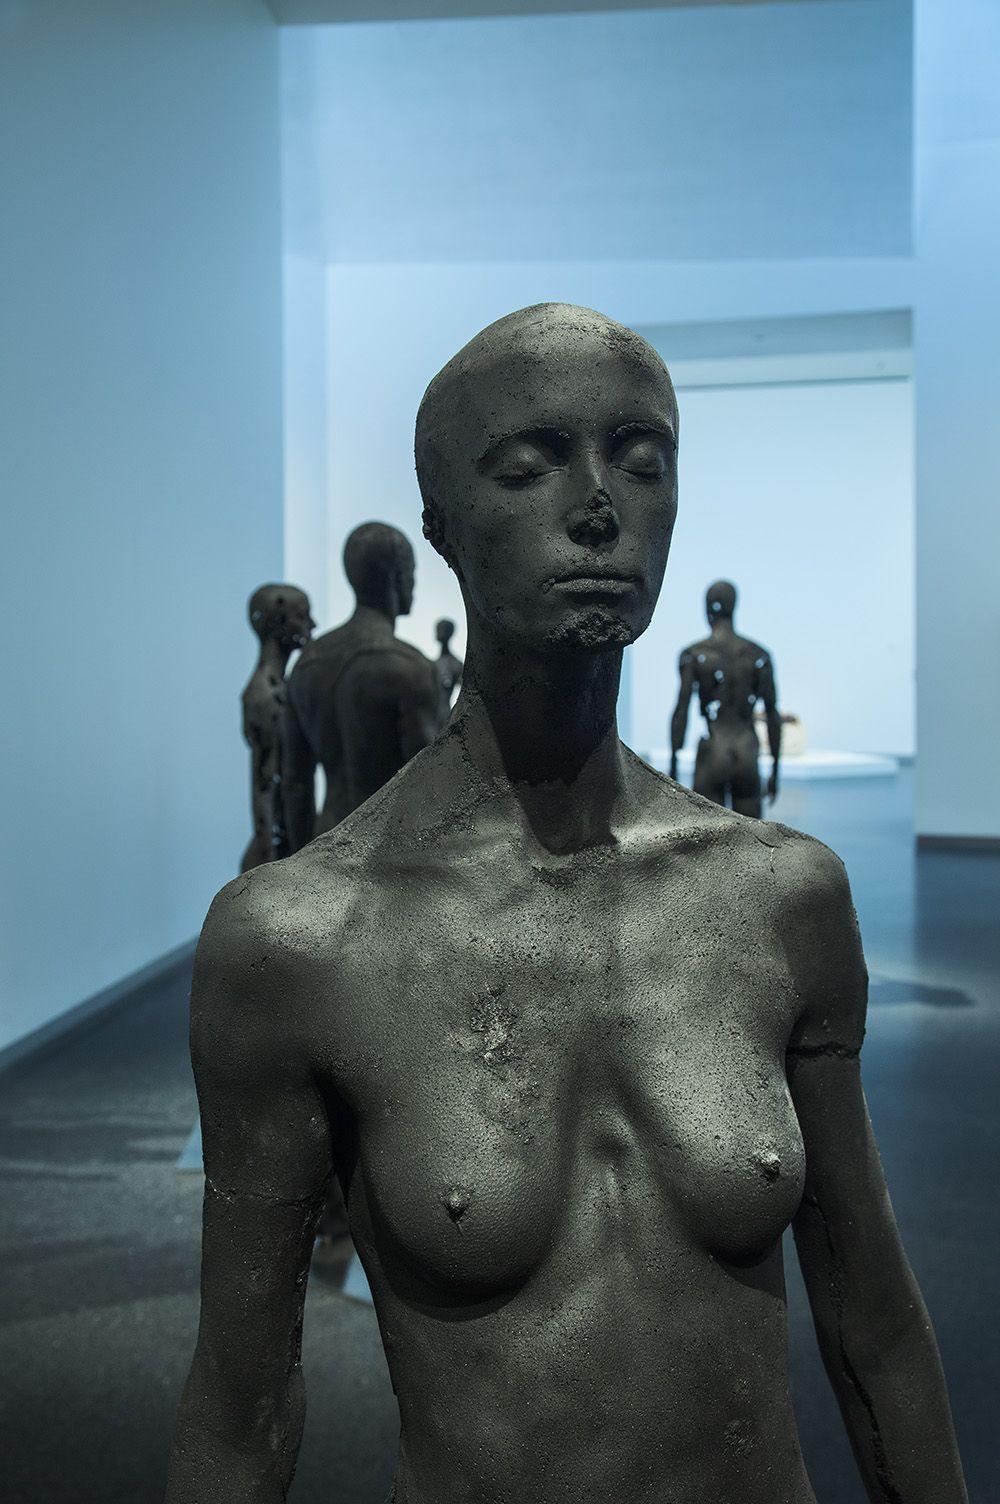 The Presence of Absence – Female (I) is a unique coal, stainless steel and epoxy resin sculpture by contemporary artist Tom Price, dimensions are 170 × 50 × 50 cm (66.9 × 19.7 × 19.7 in). 
The sculpture is signed and comes with a certificate of